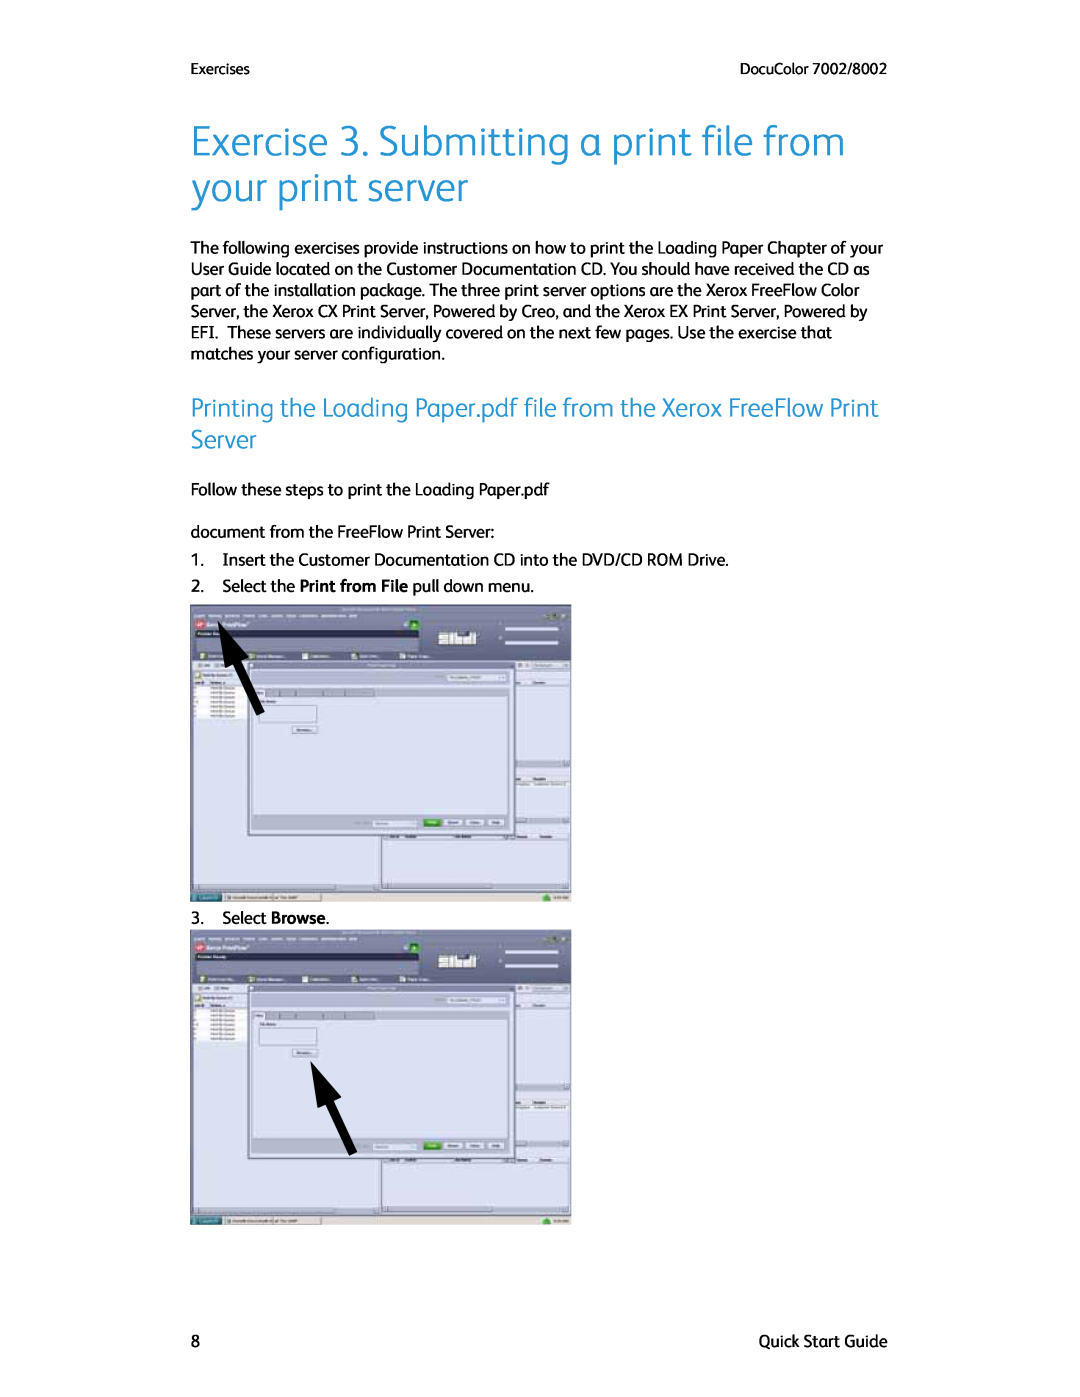 Xerox 7002, 8002 manual Exercise 3. Submitting a print file from your print server 